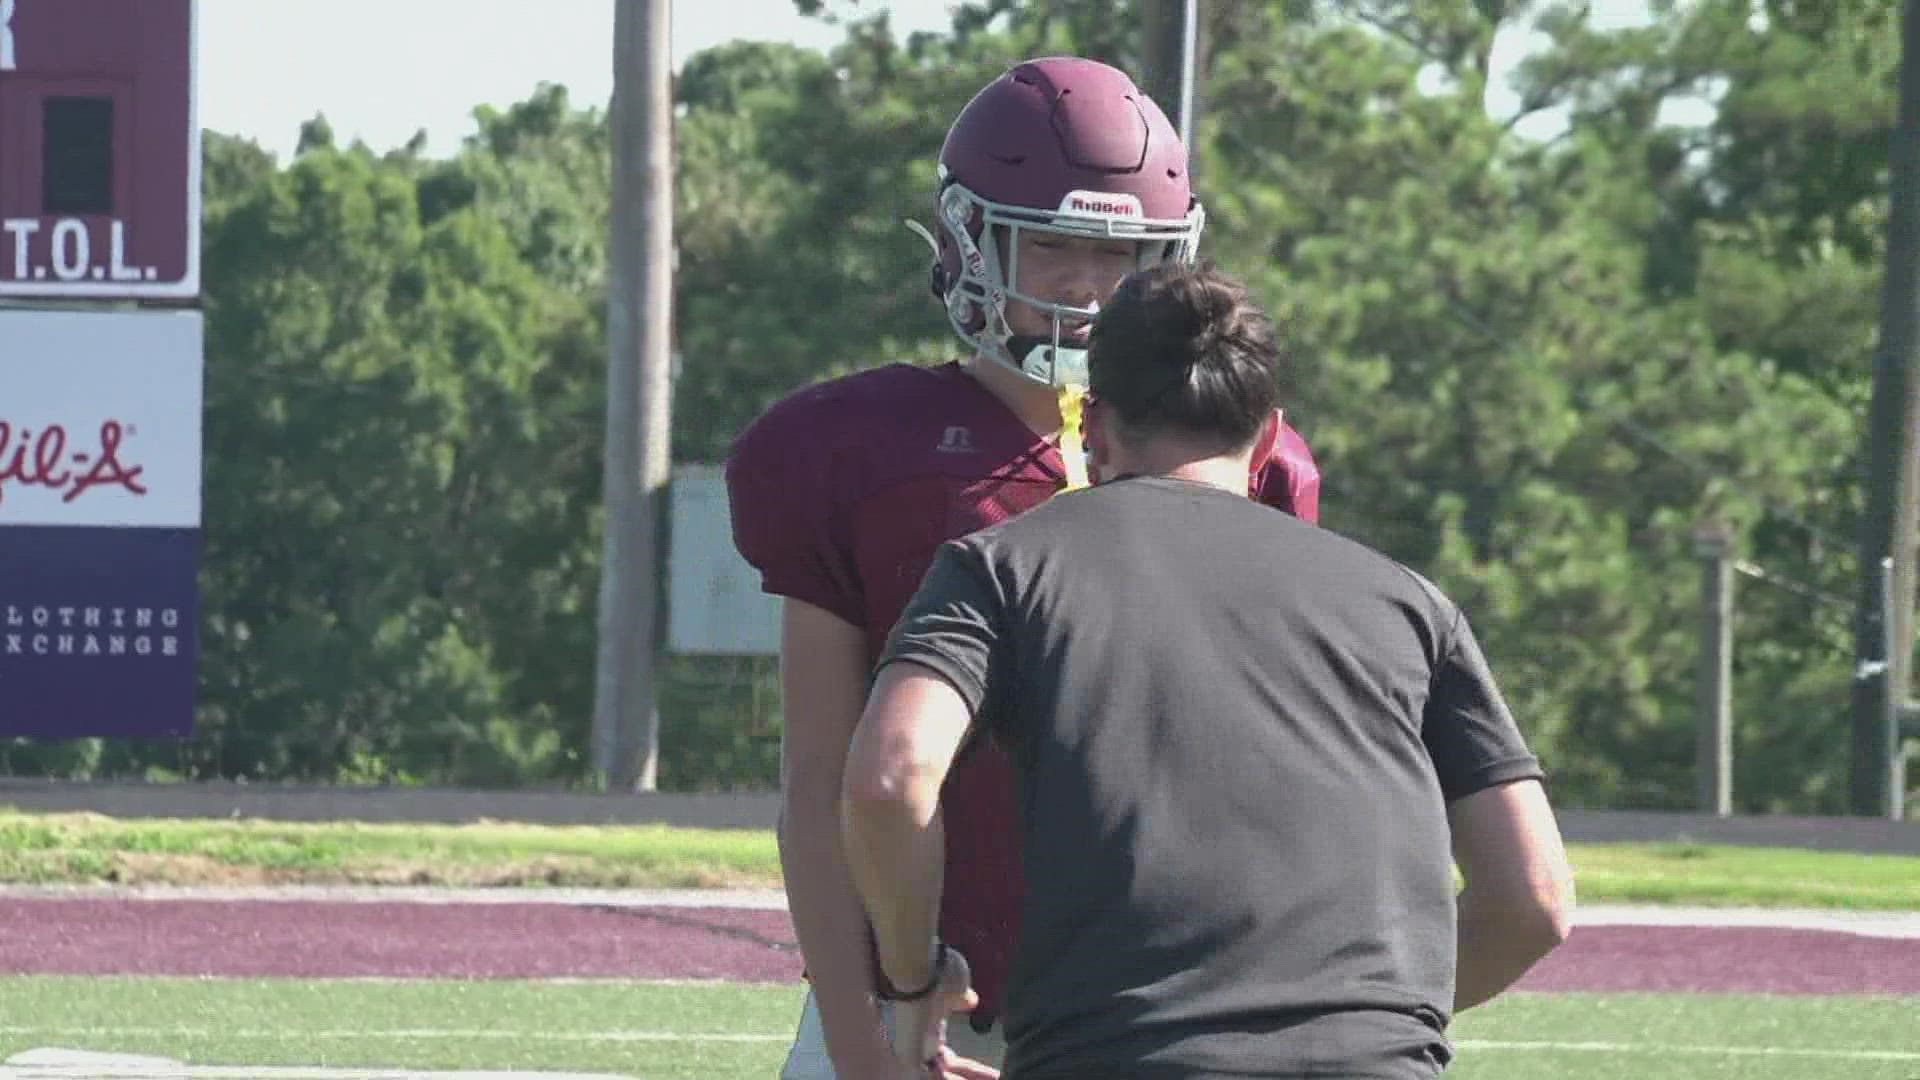 Leading up to the high school football season, the WBIR sports team is going to different practices all over East Tennessee and highlighting one standout player.